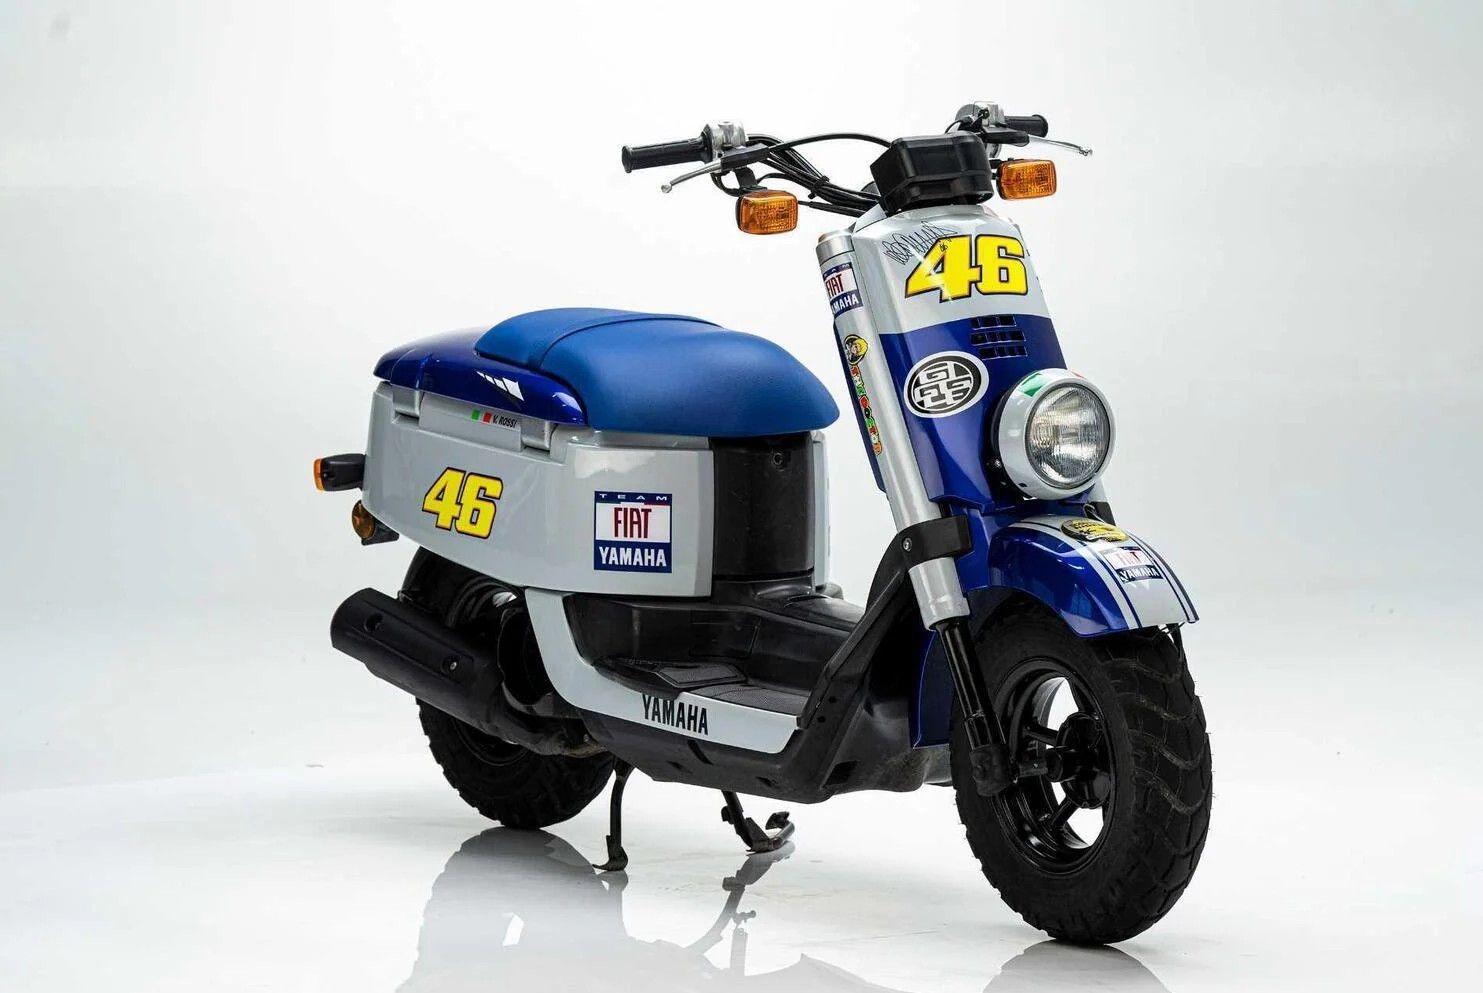 To Own Valentino Rossi's Personal Yamaha From His MotoGP Days